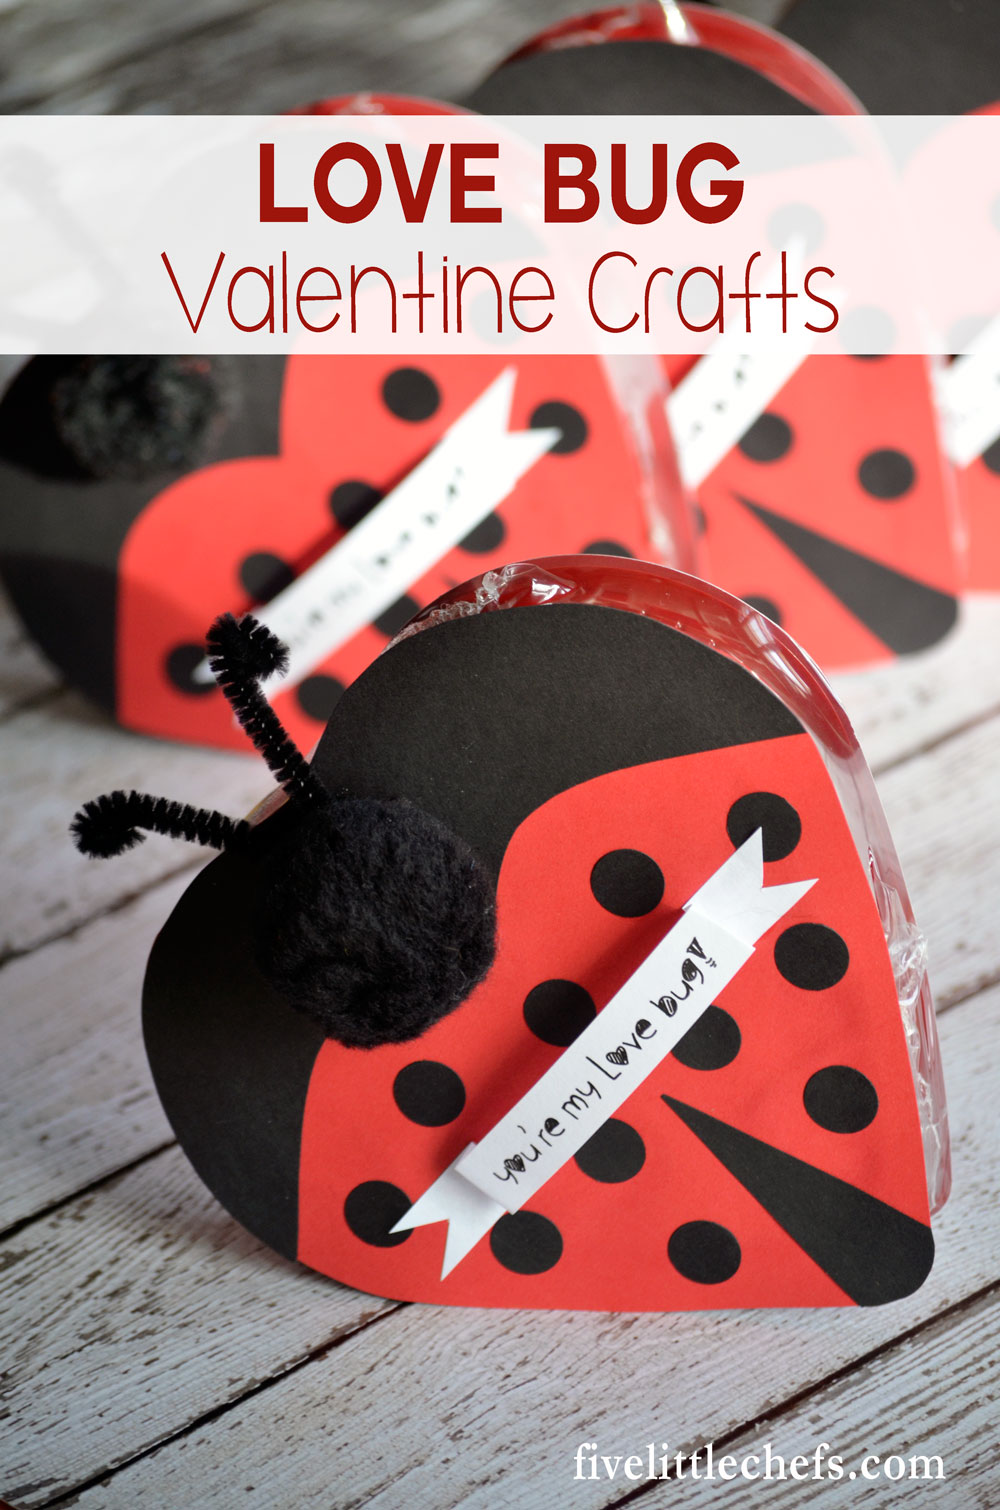 Love Bug Chocolate Craft is a perfect Valentine's Day gift for kids or for a family member. Includes printable to make the craft easier. 